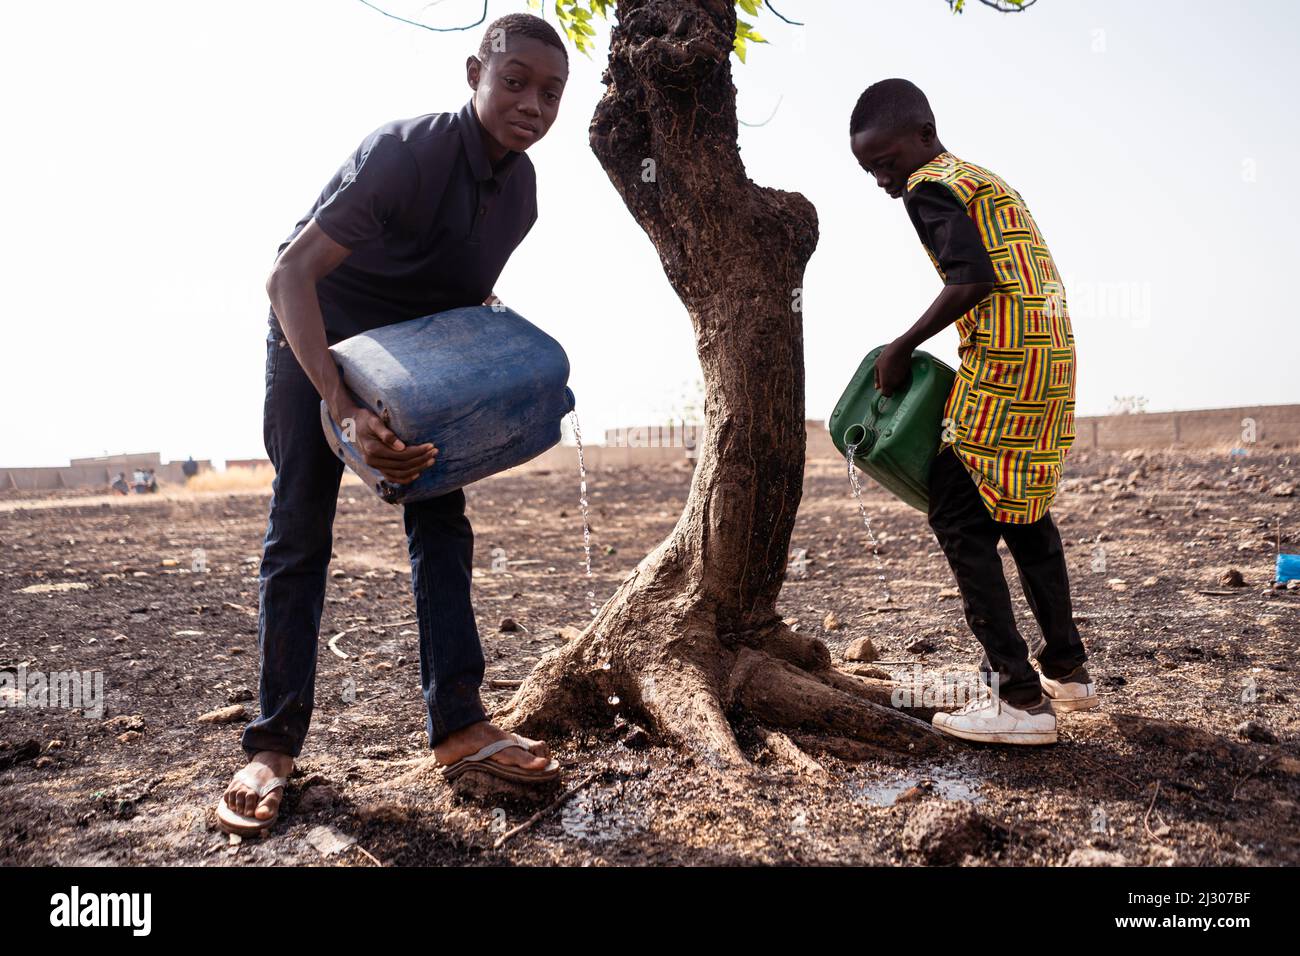 Lonely dried up tree in scorched arid African farmland, with two boys trying to save it by watering its roots; global problem of desertification and c Stock Photo